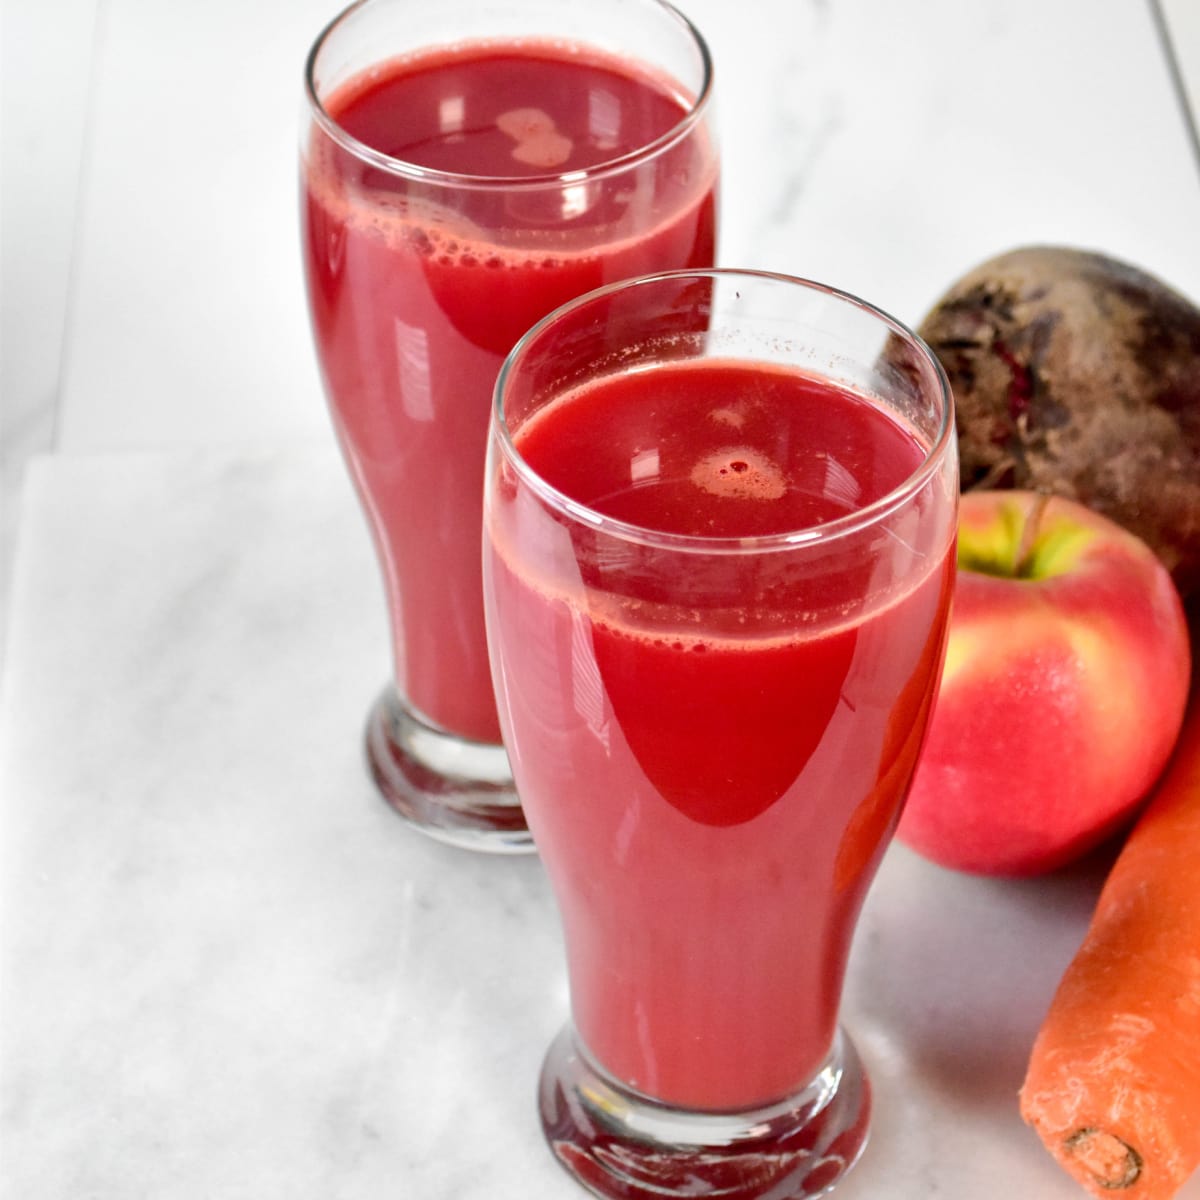 Heart Healthy and Cleansing Beet Juice - Zesty South Indian Kitchen